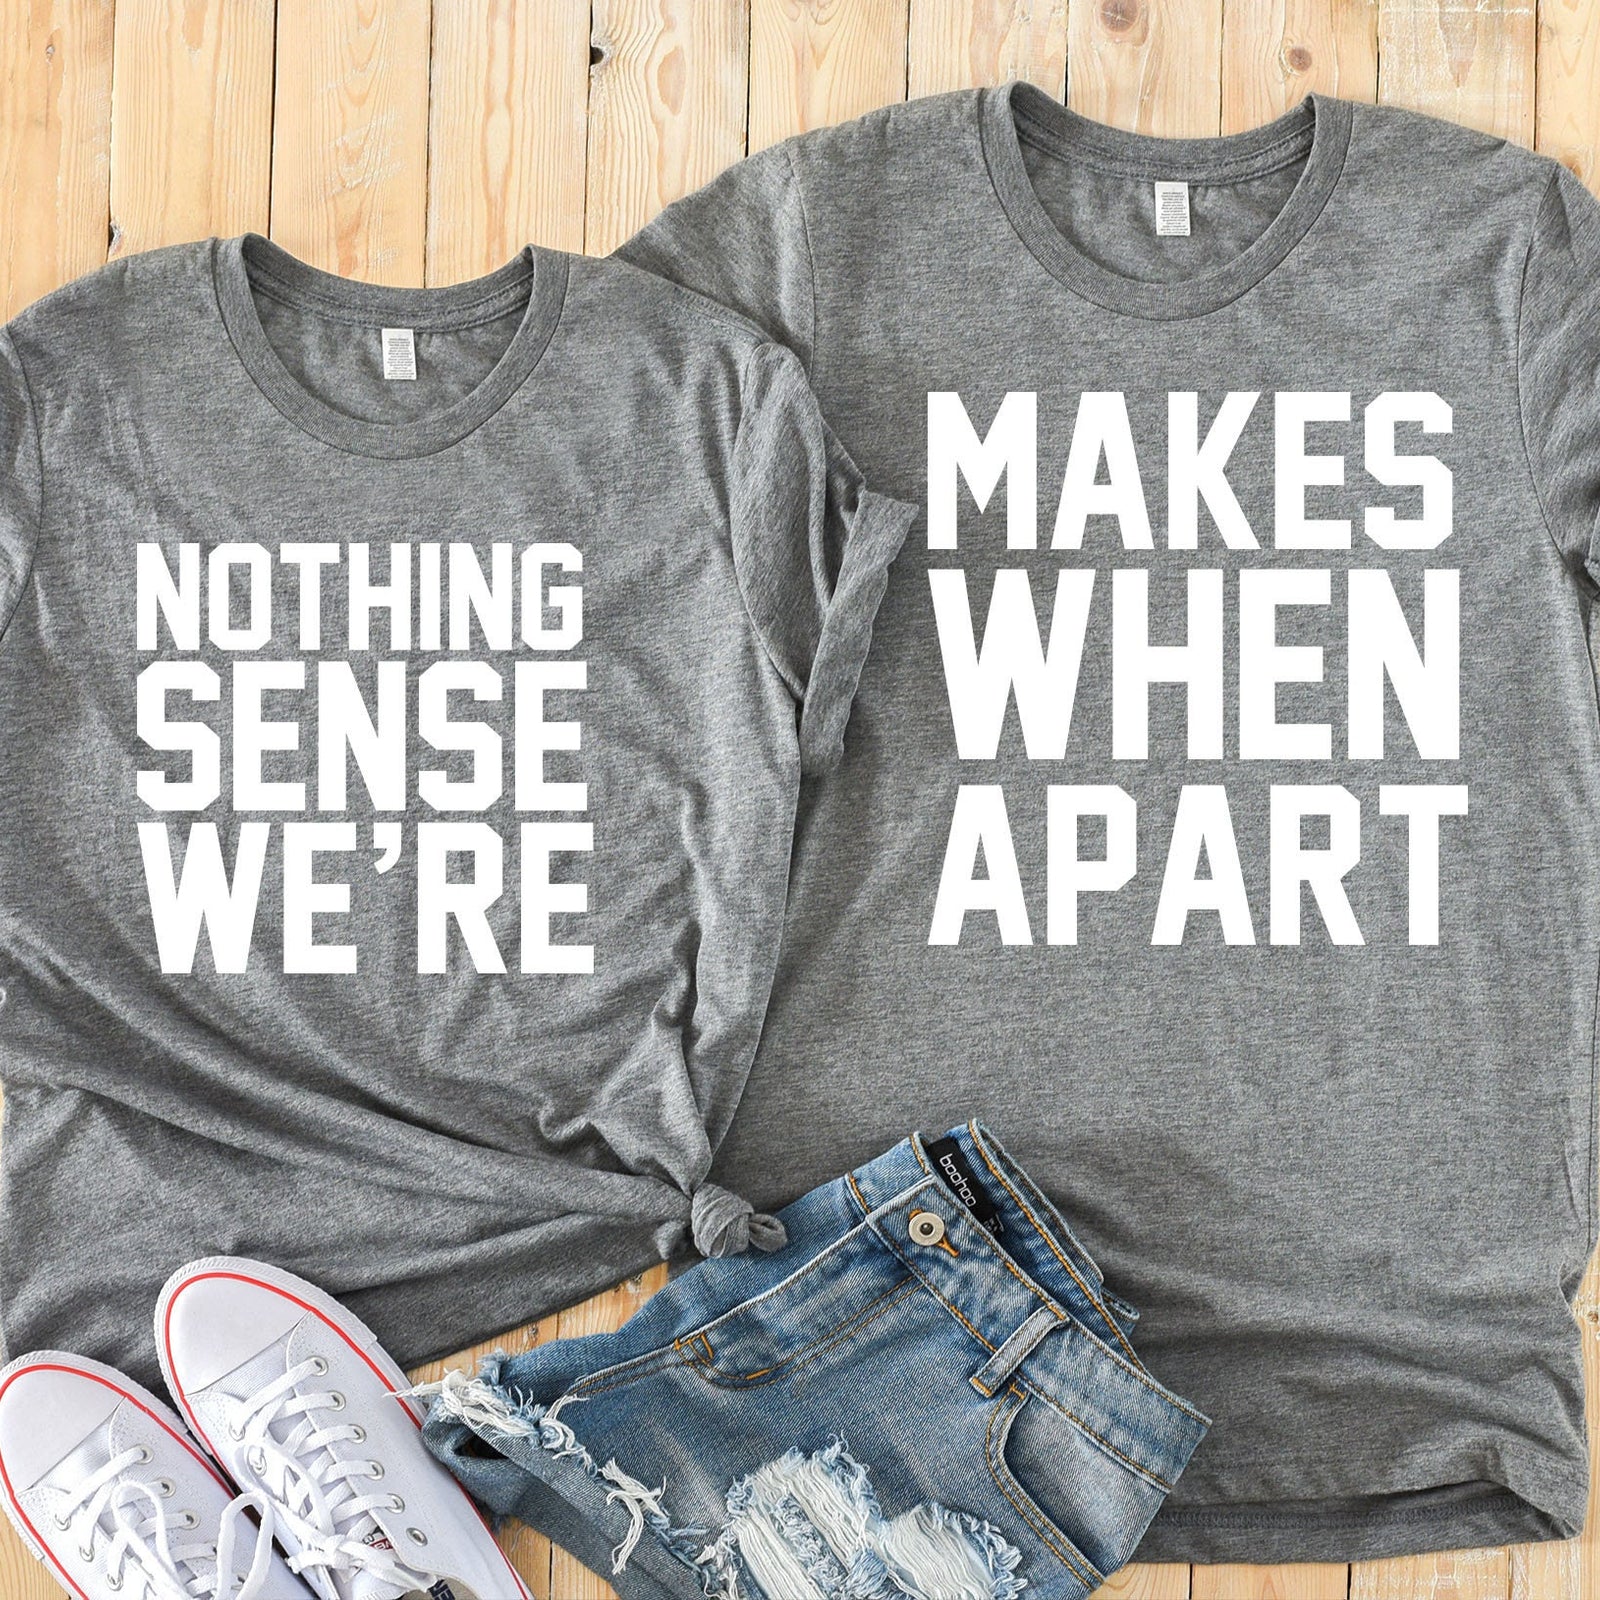 Nothing Makes Sense When We Are Apart -  Cute Couples T Shirts - Matching Shirts for Couples - Funny Matching Shirts